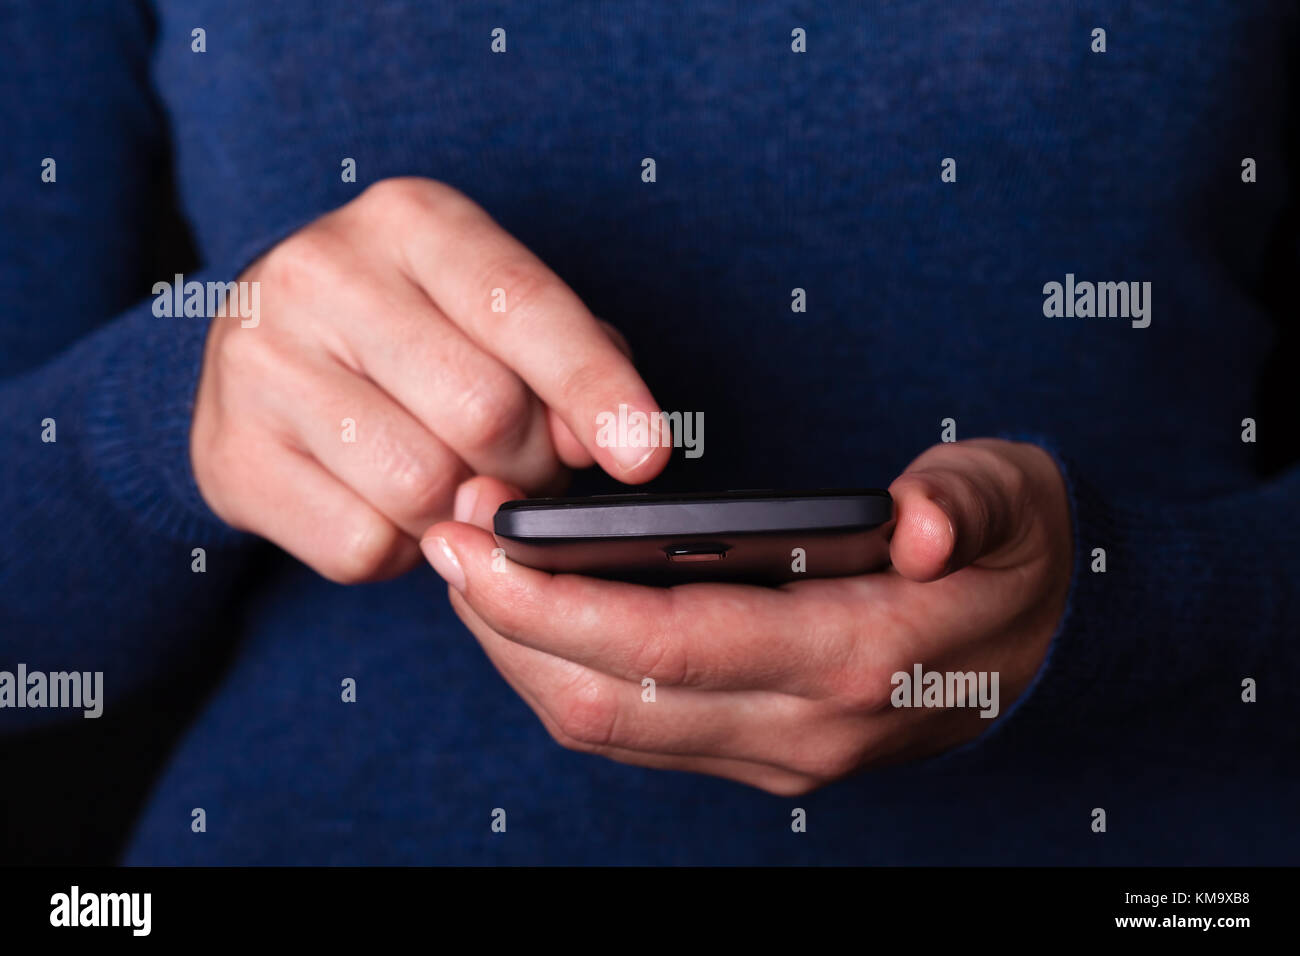 Woman holding and touching screen or display with finger of a mobile phone, cell phone or smartphone. Female businesswoman typing a message or browsin Stock Photo